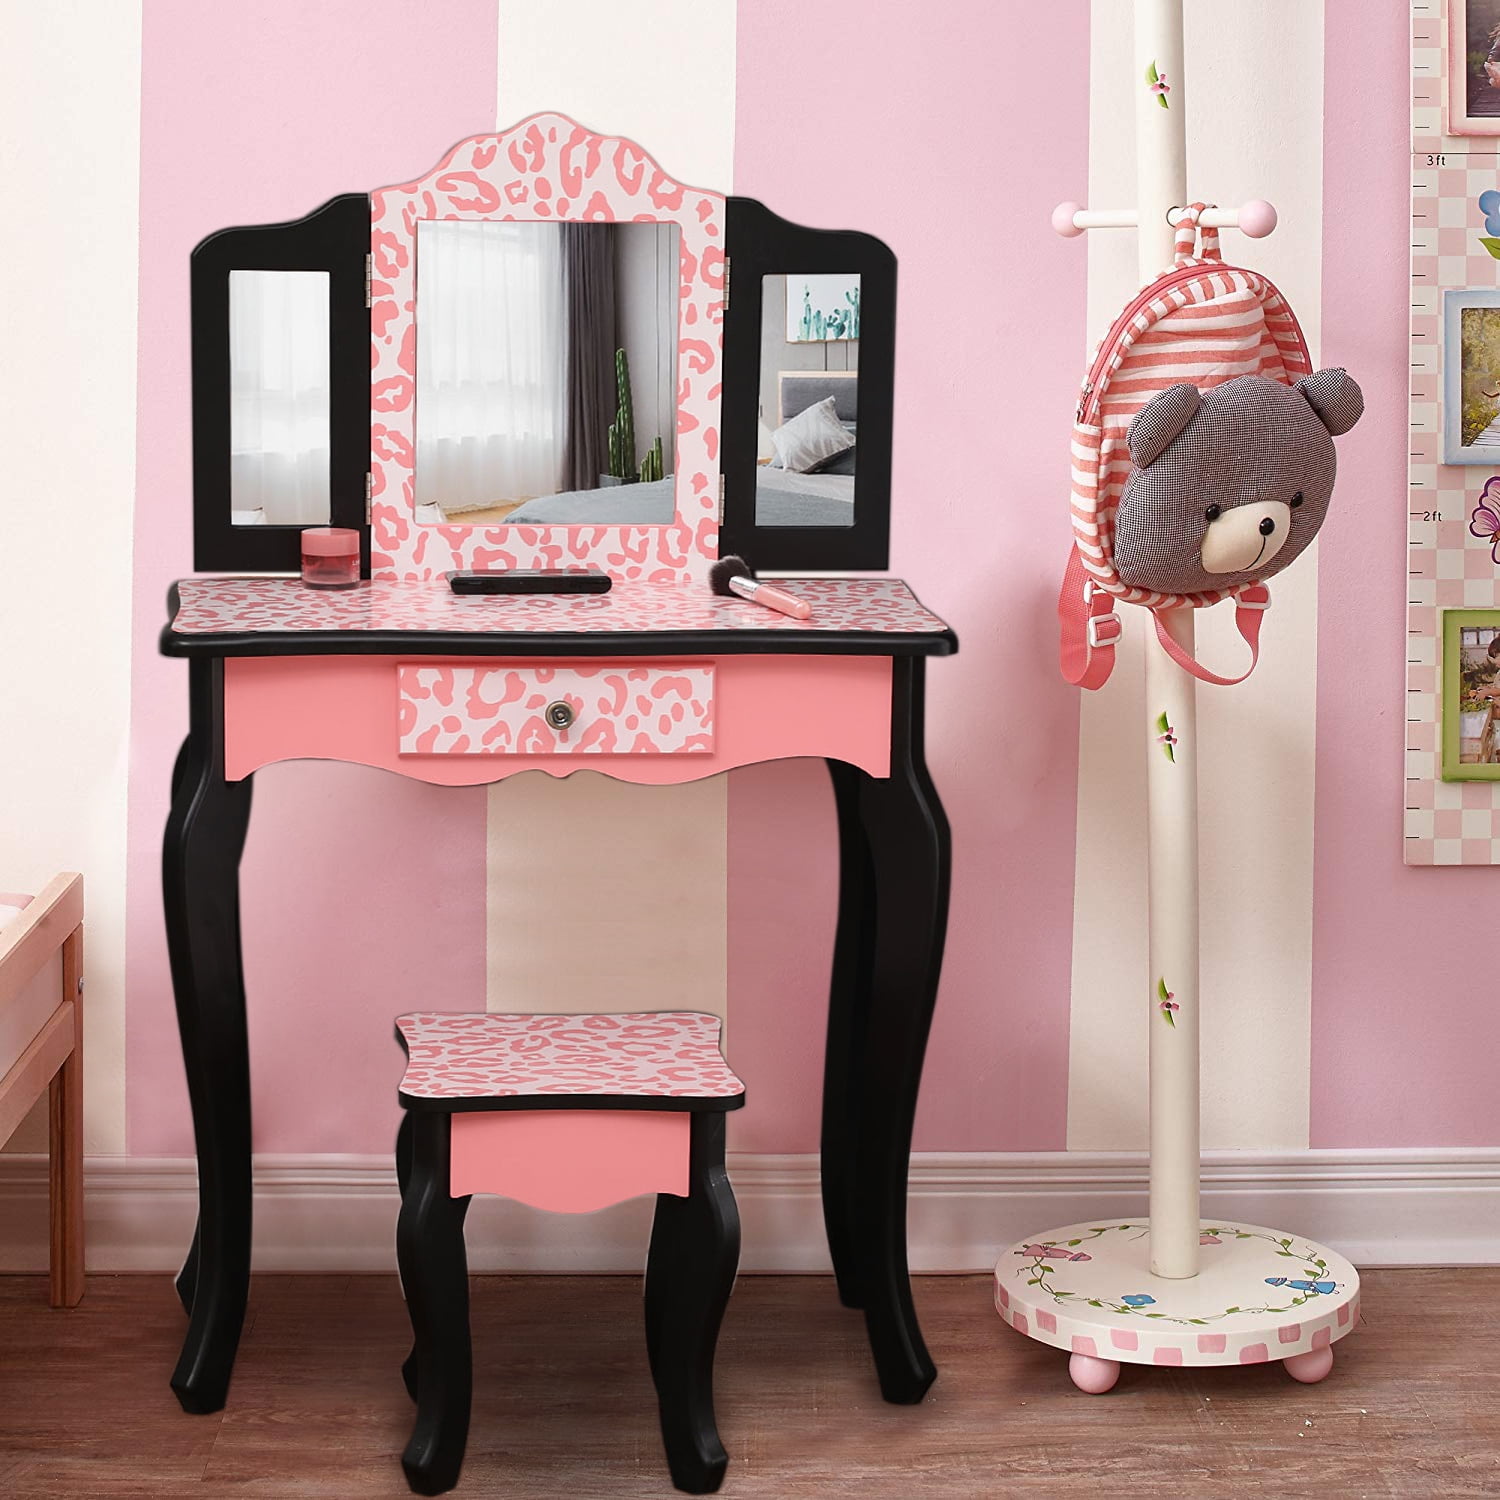 Kiddie Play Pretend Kids Vanity Table and Chair Beauty Set With Fashion & Makeup for sale online 